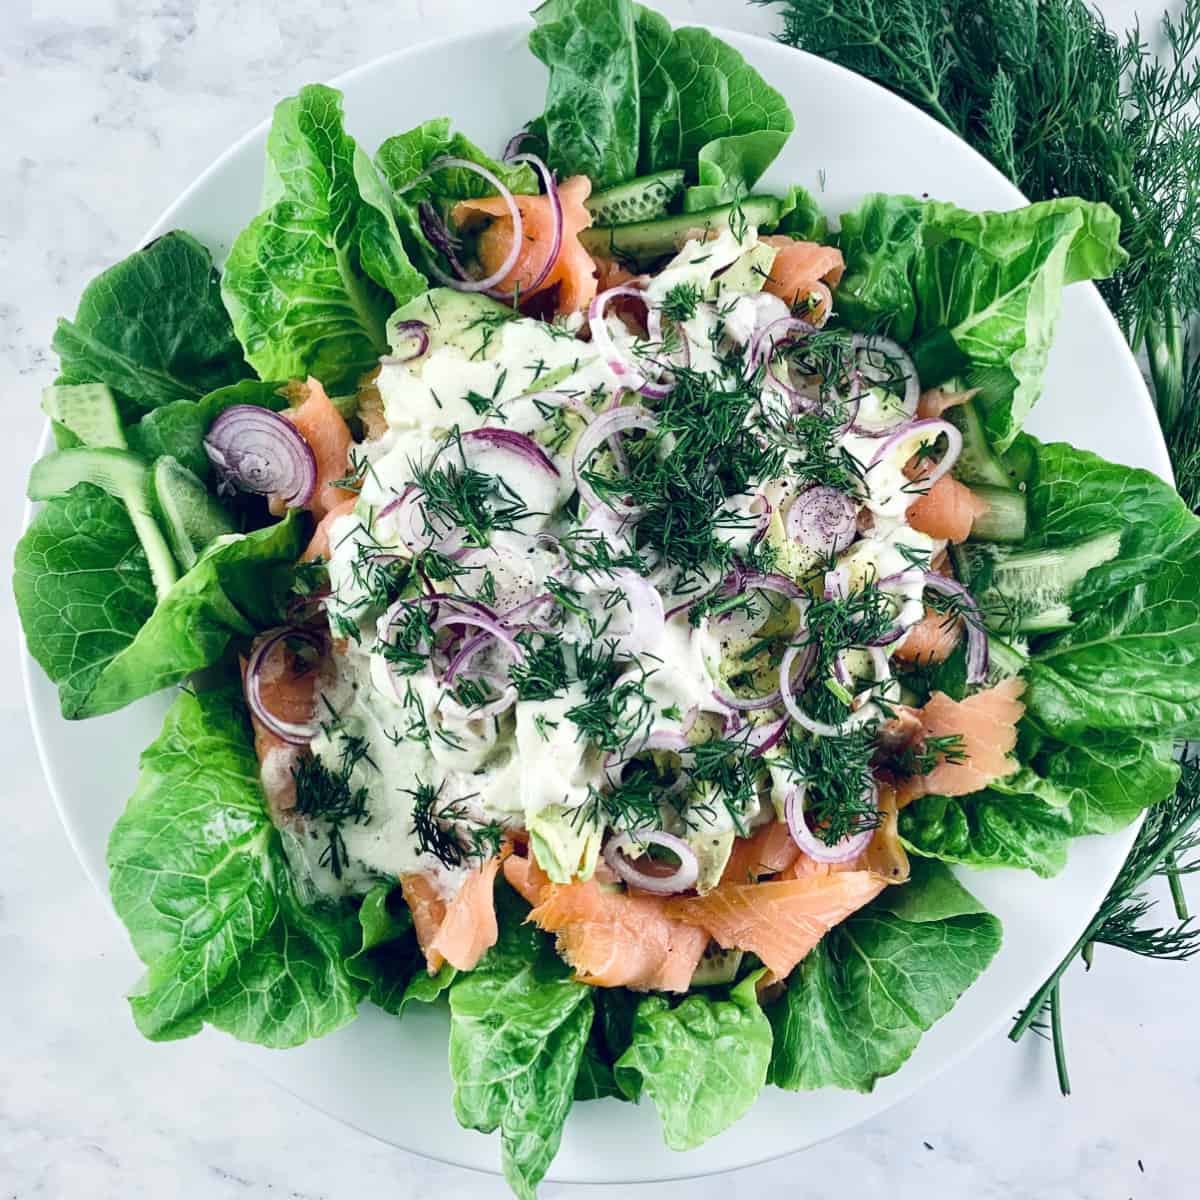 Smoked Salmon Avocado Salad on a white platter with fresh dill on top right corner.